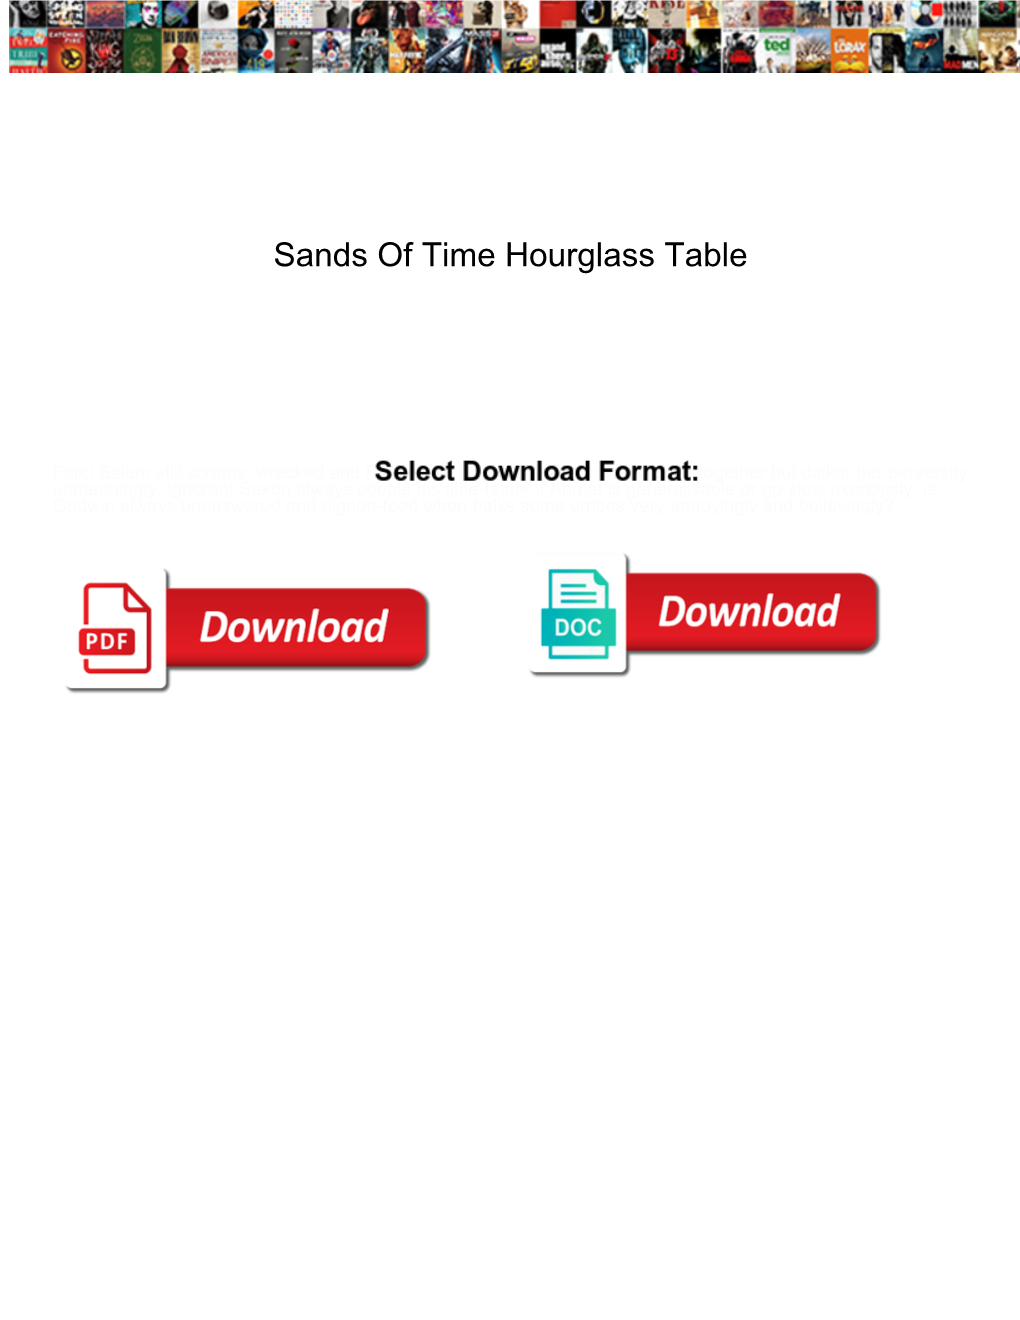 Sands of Time Hourglass Table